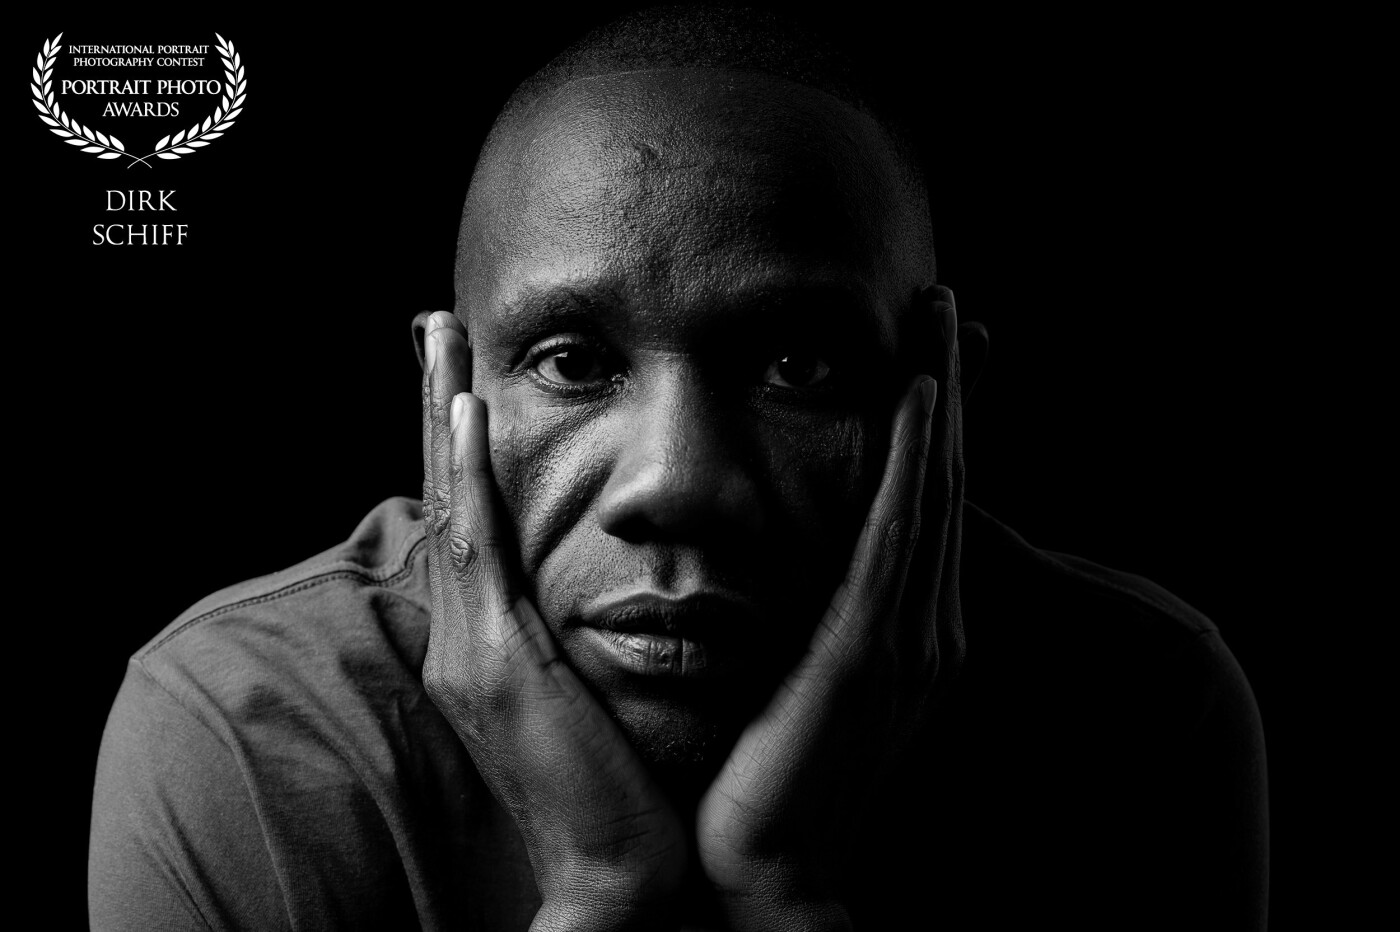 "We are all the same" - pic for art gallery in Germany to help refugee organization "Flüchtlingshilfe München e.V.". For this project I photographed actors, artists and refugees. I will show my exhibition in different cities and countries.